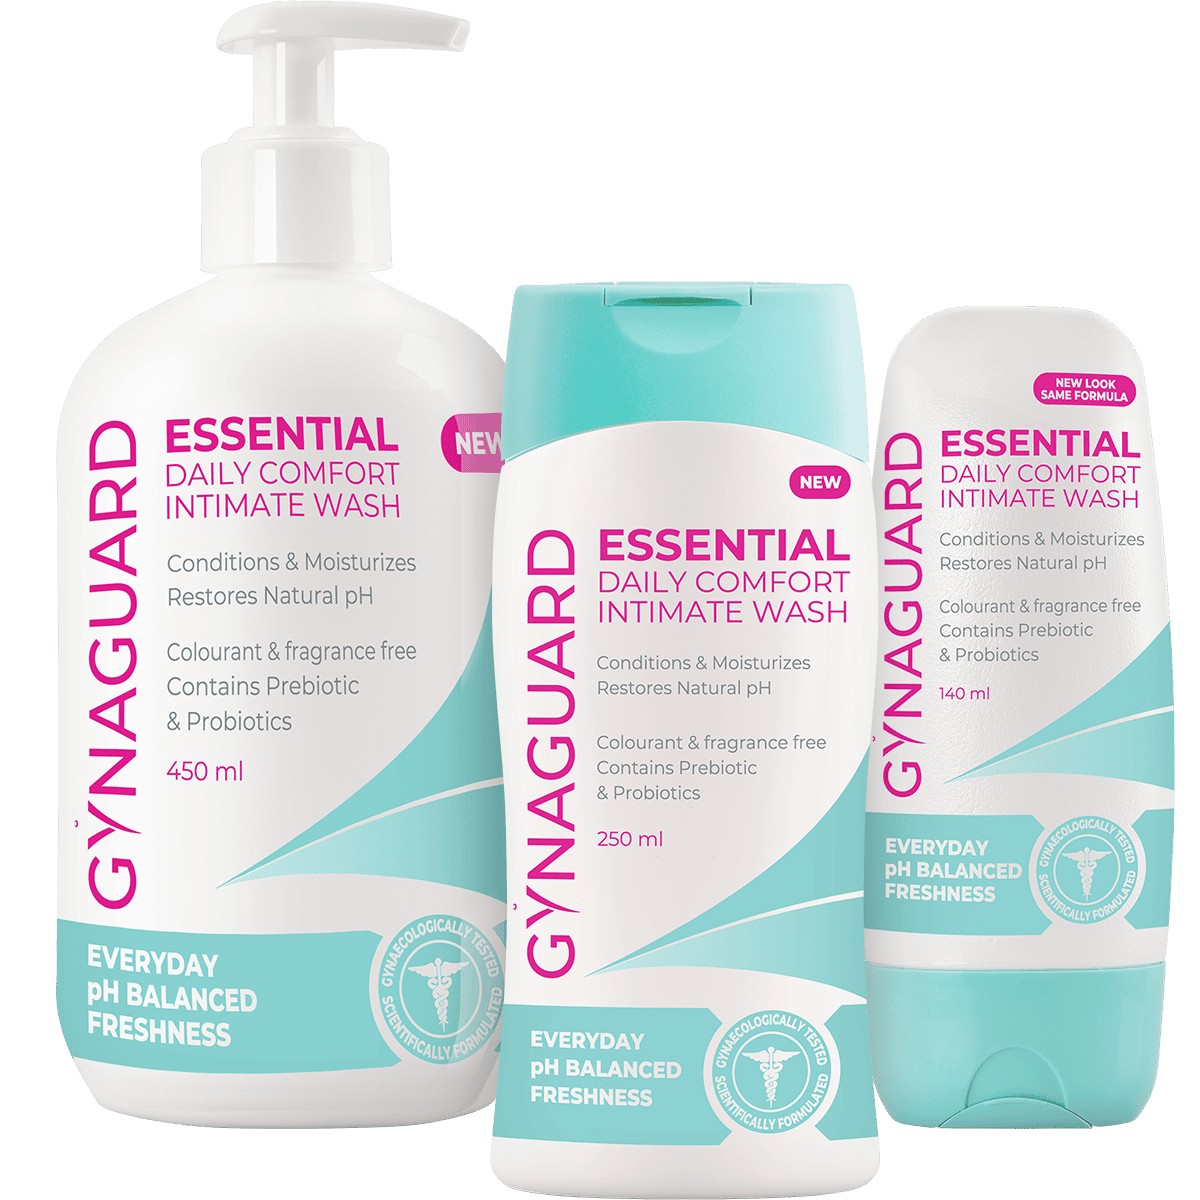 ESSENTIAL DAILY COMFORT INTIMATE WASH